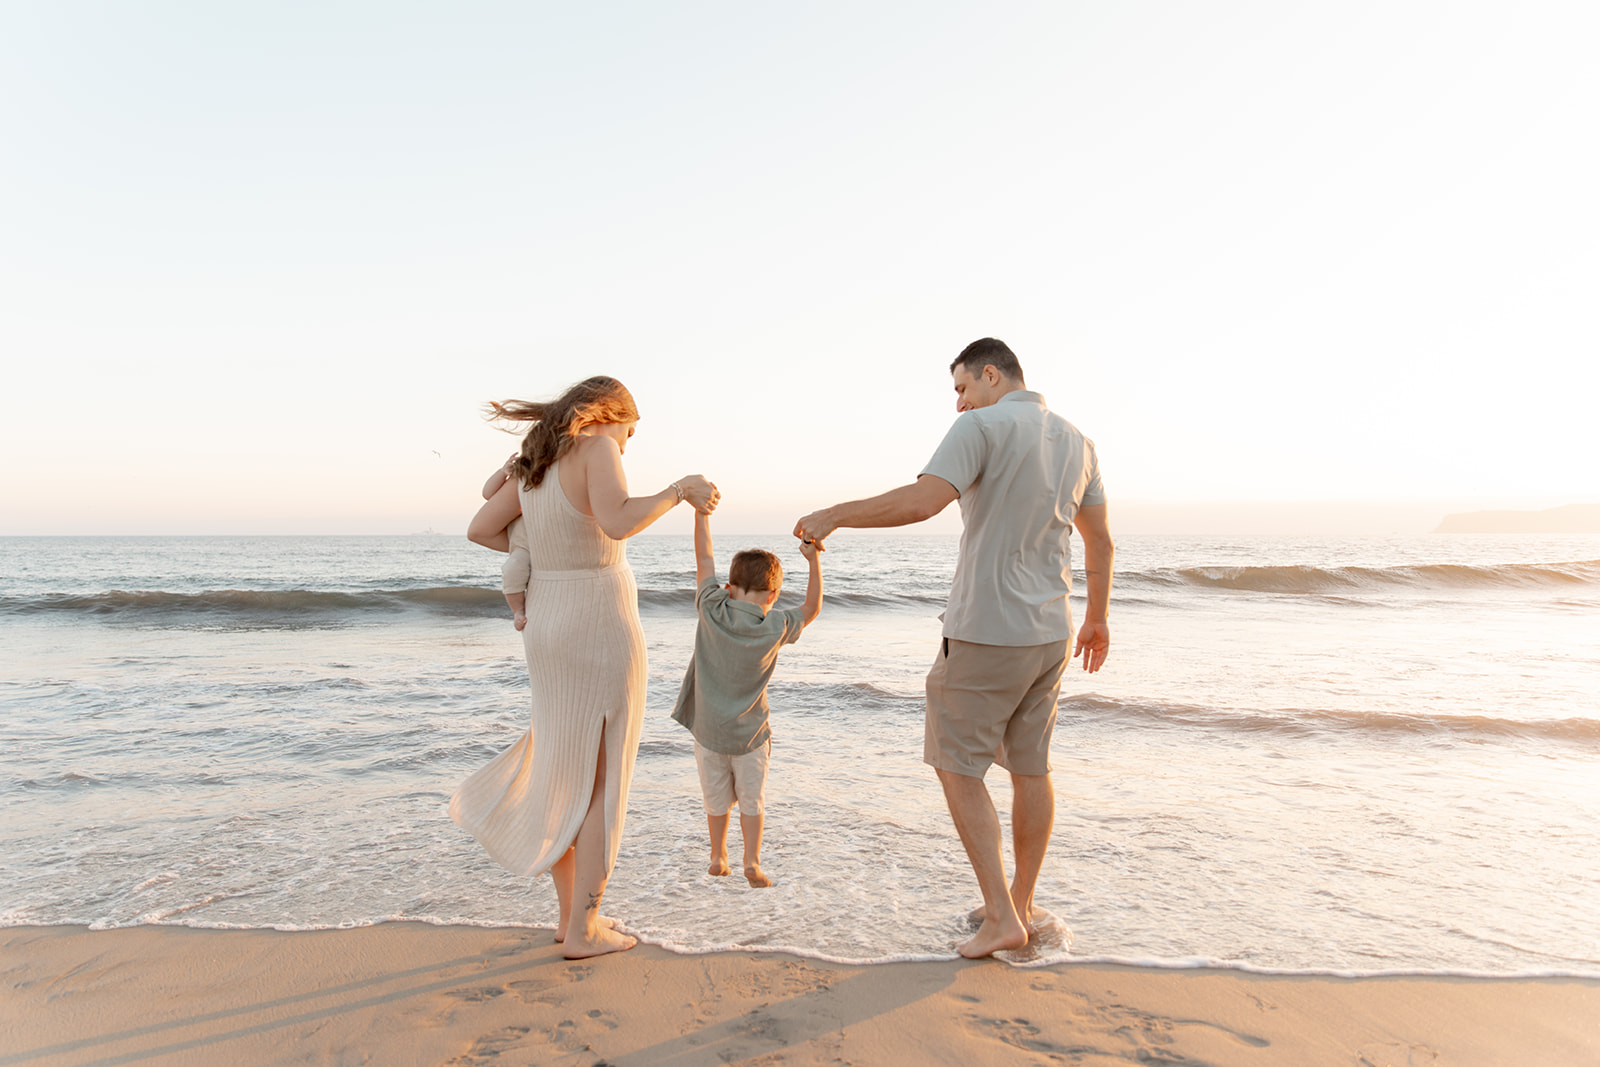 A mom and dad hold the hands and lift their toddler son above a wave on the beach at sunset